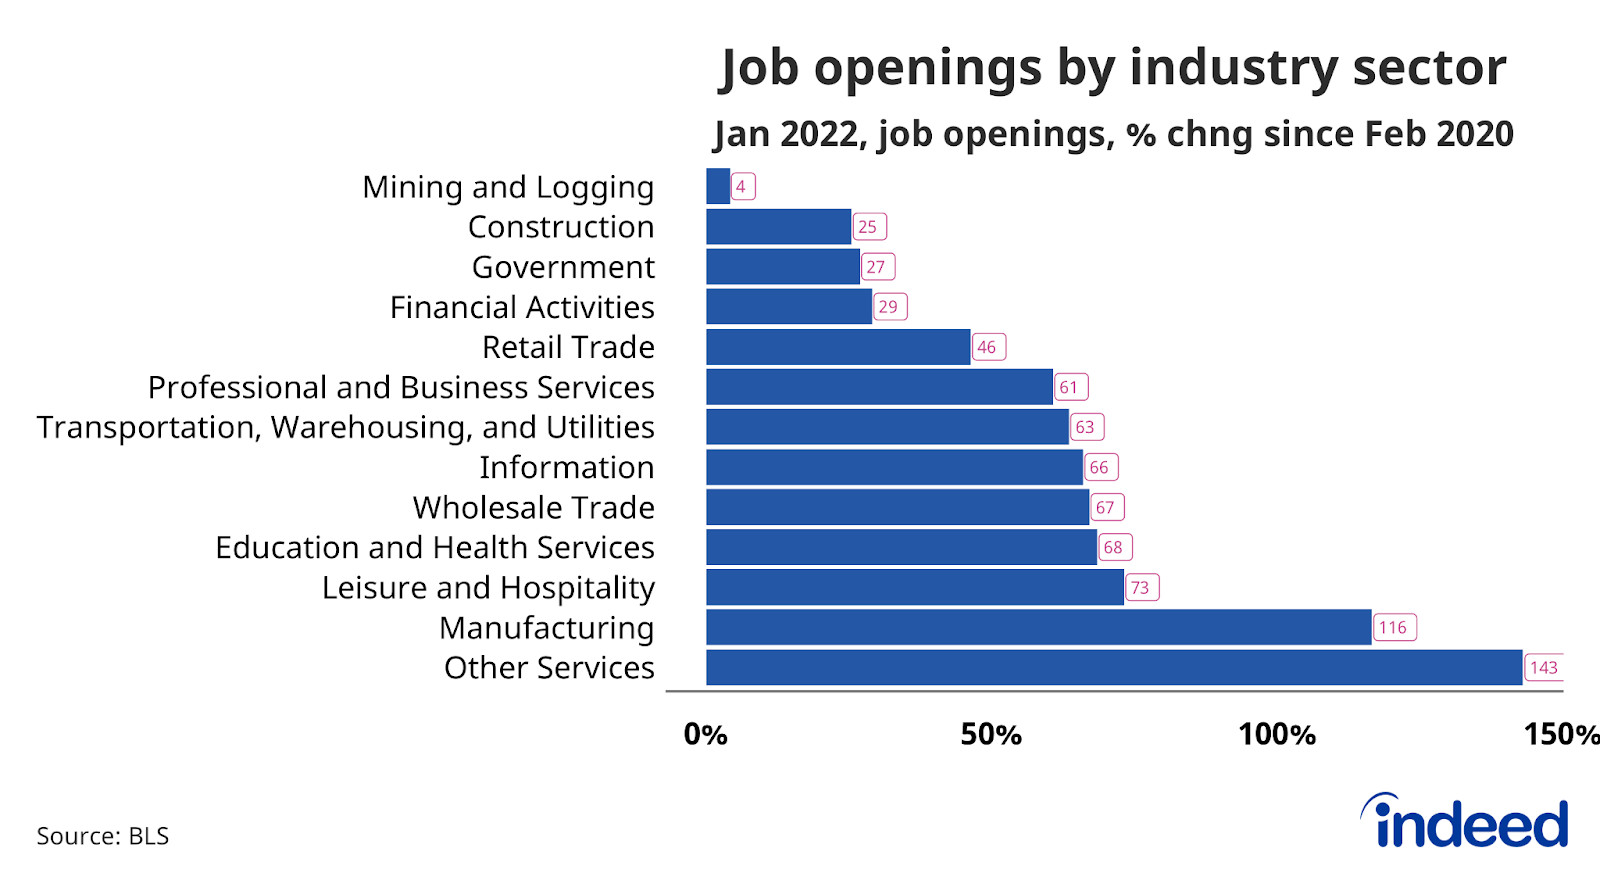 Bar chart showing job openings by industry sector.